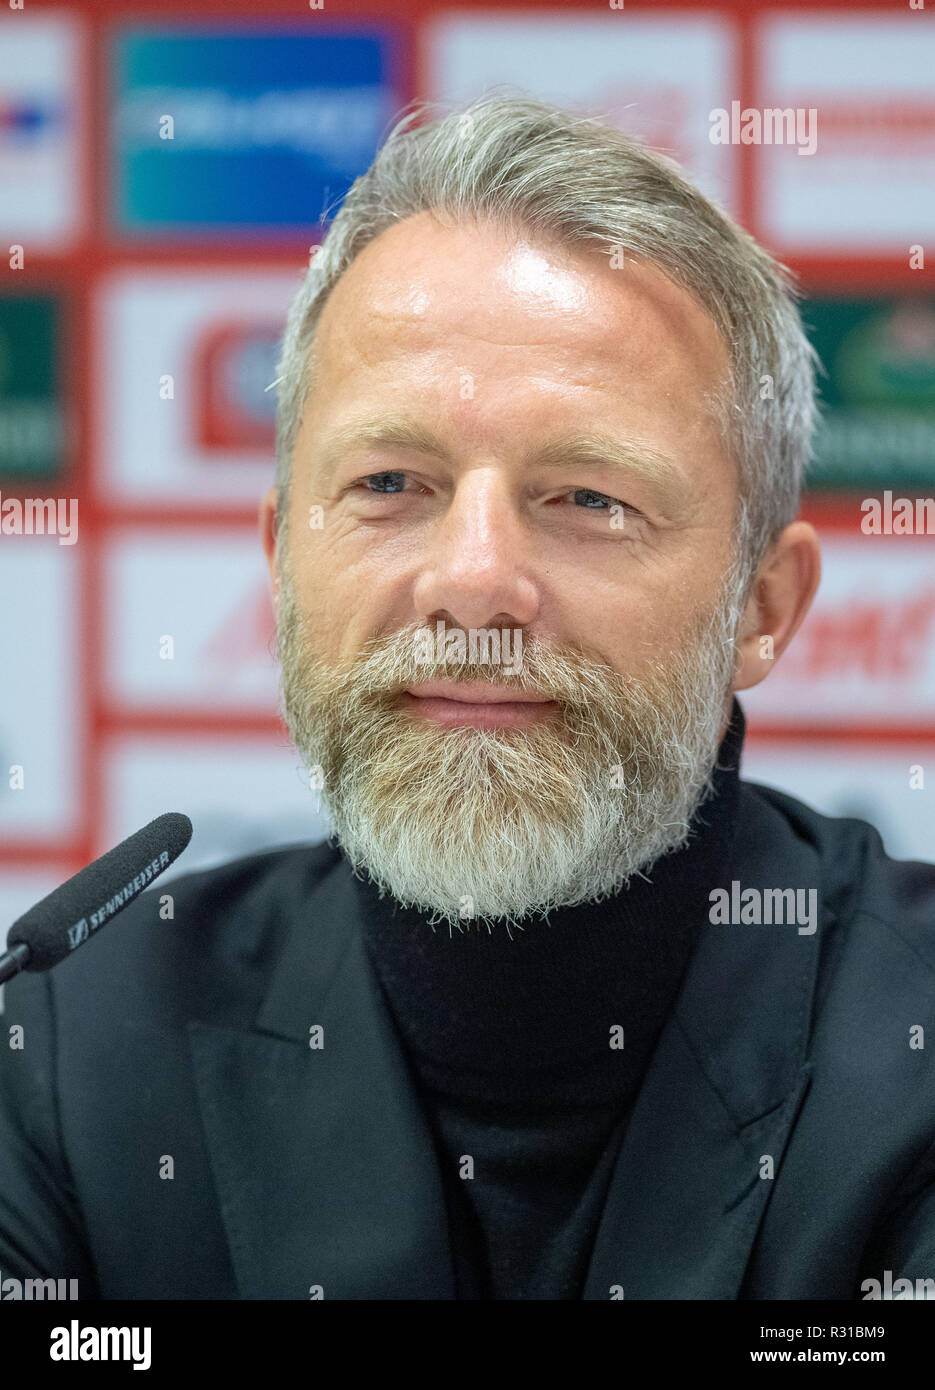 Ingolstadt, Germany. 21st Nov, 2018. Thomas Linke, former national player  and vice world champion of 2002, takes part in a press conference at FC  Ingolstadt 04. The 48-year-old is to advise the